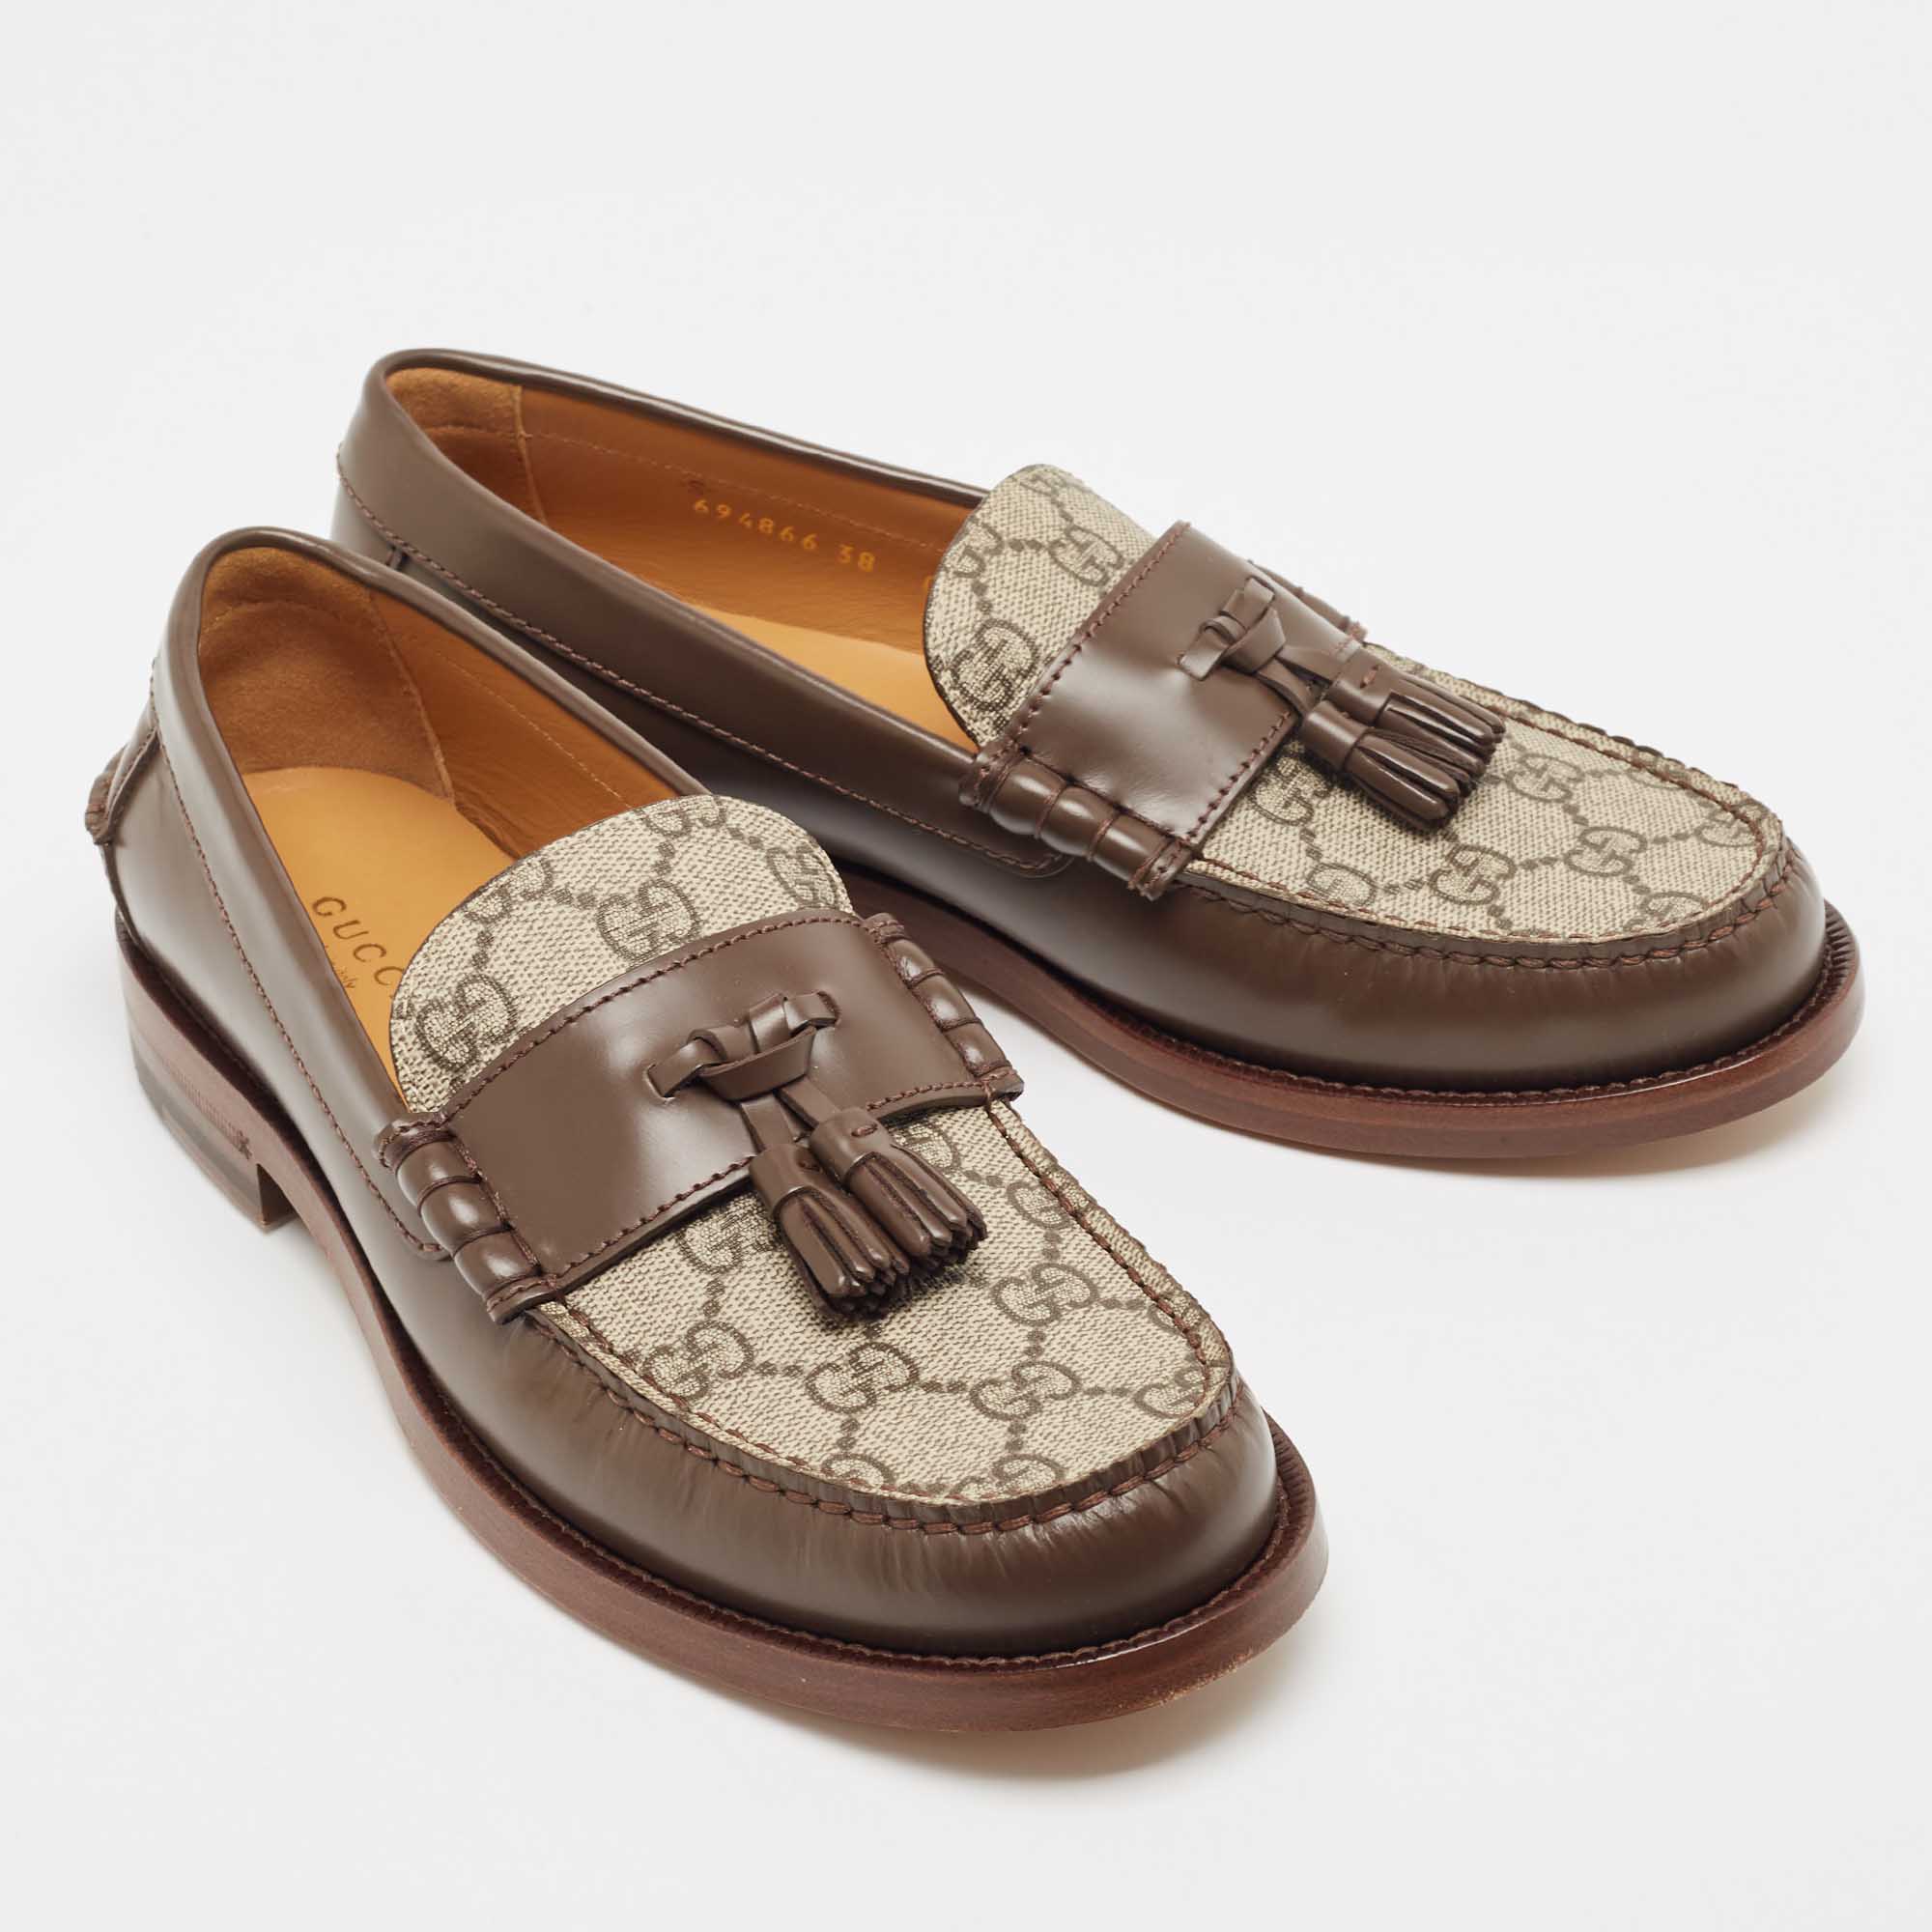 Gucci Beige/Brown GG Supreme Canvas And Leather Tassel Loafers Size 38